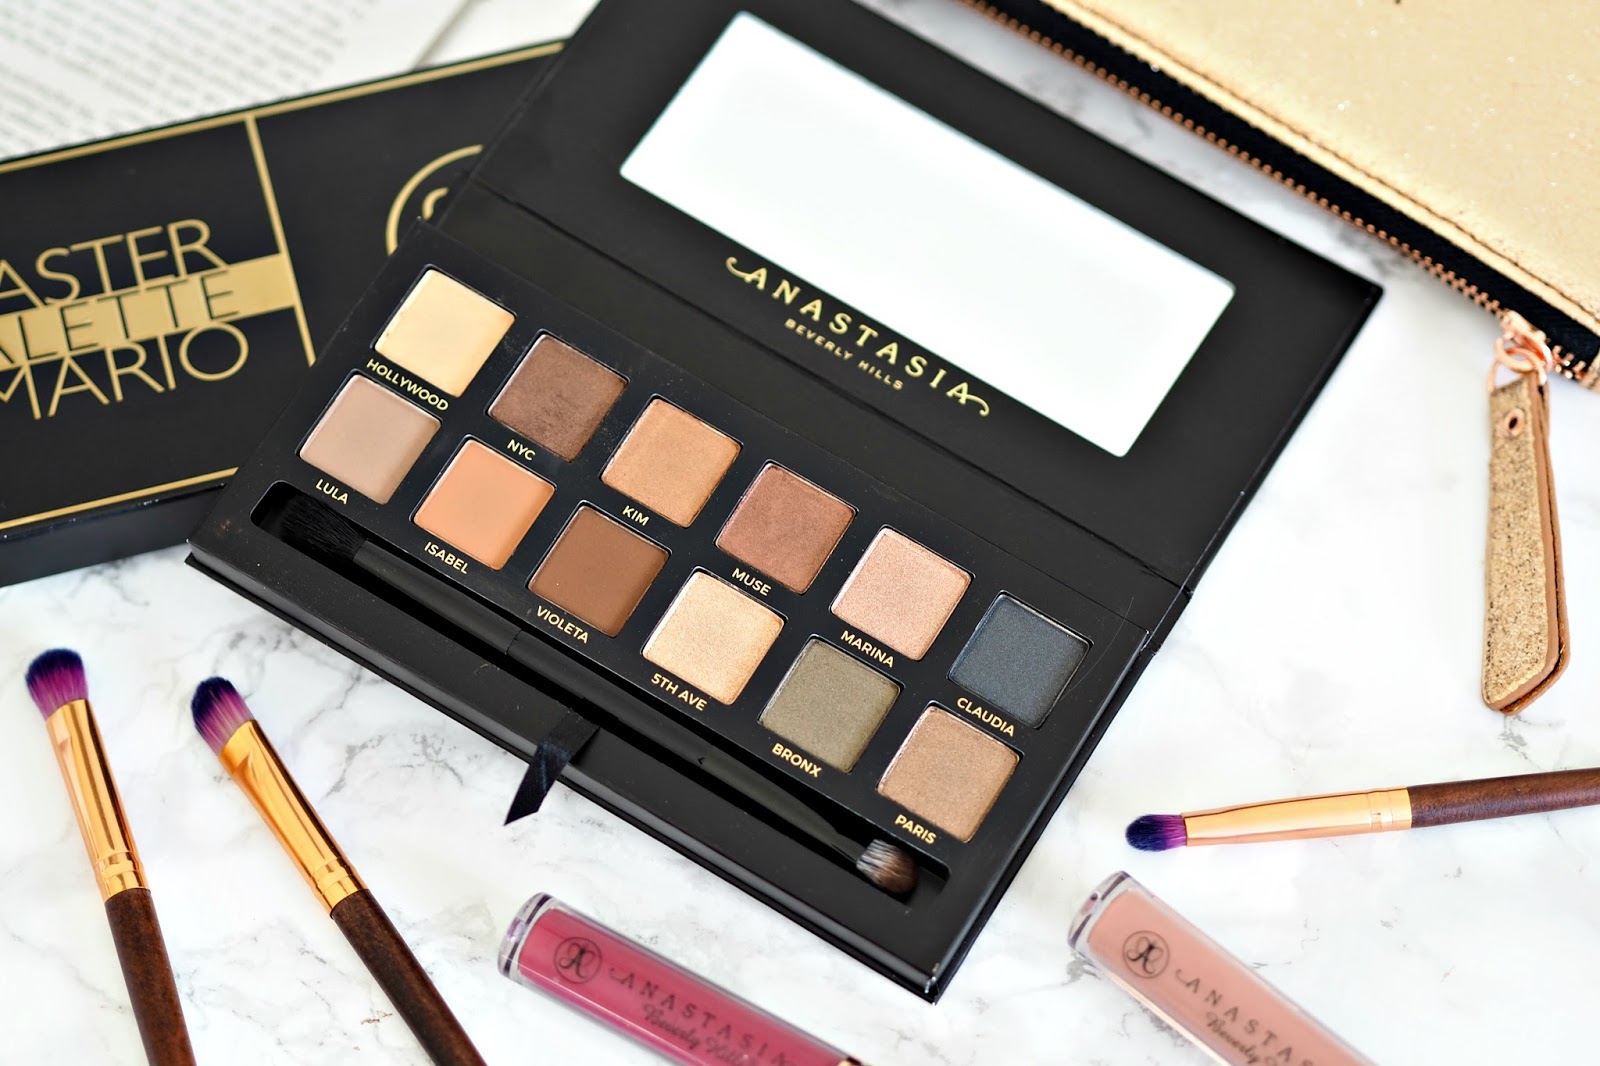 Anastasia Beverly Hills Master by Mario Palette Review & Swatches